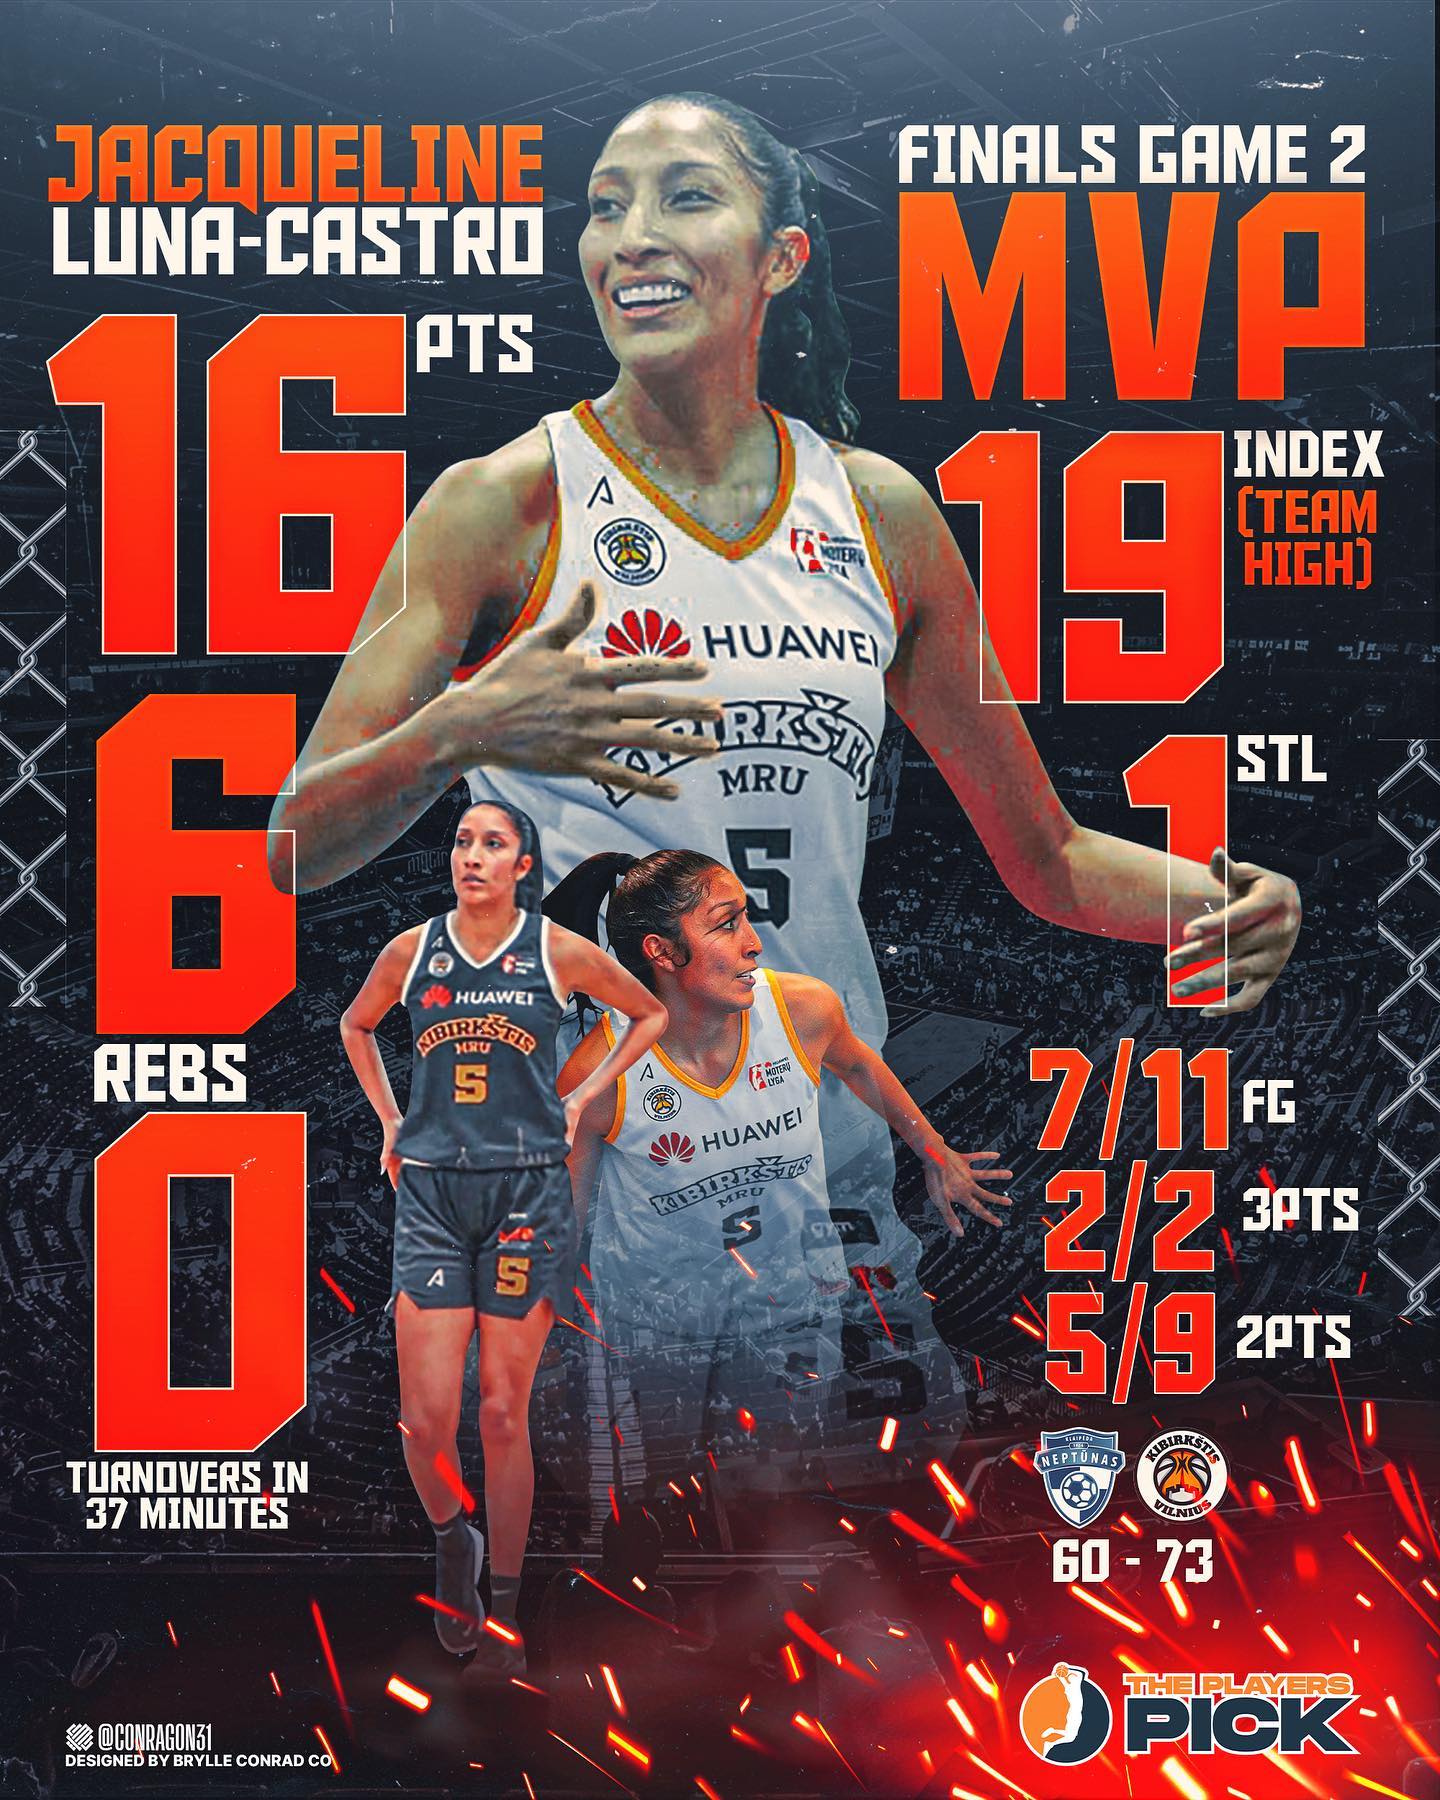 Luna-Castro was the MVP of Finals Game 2 in Lithuania!